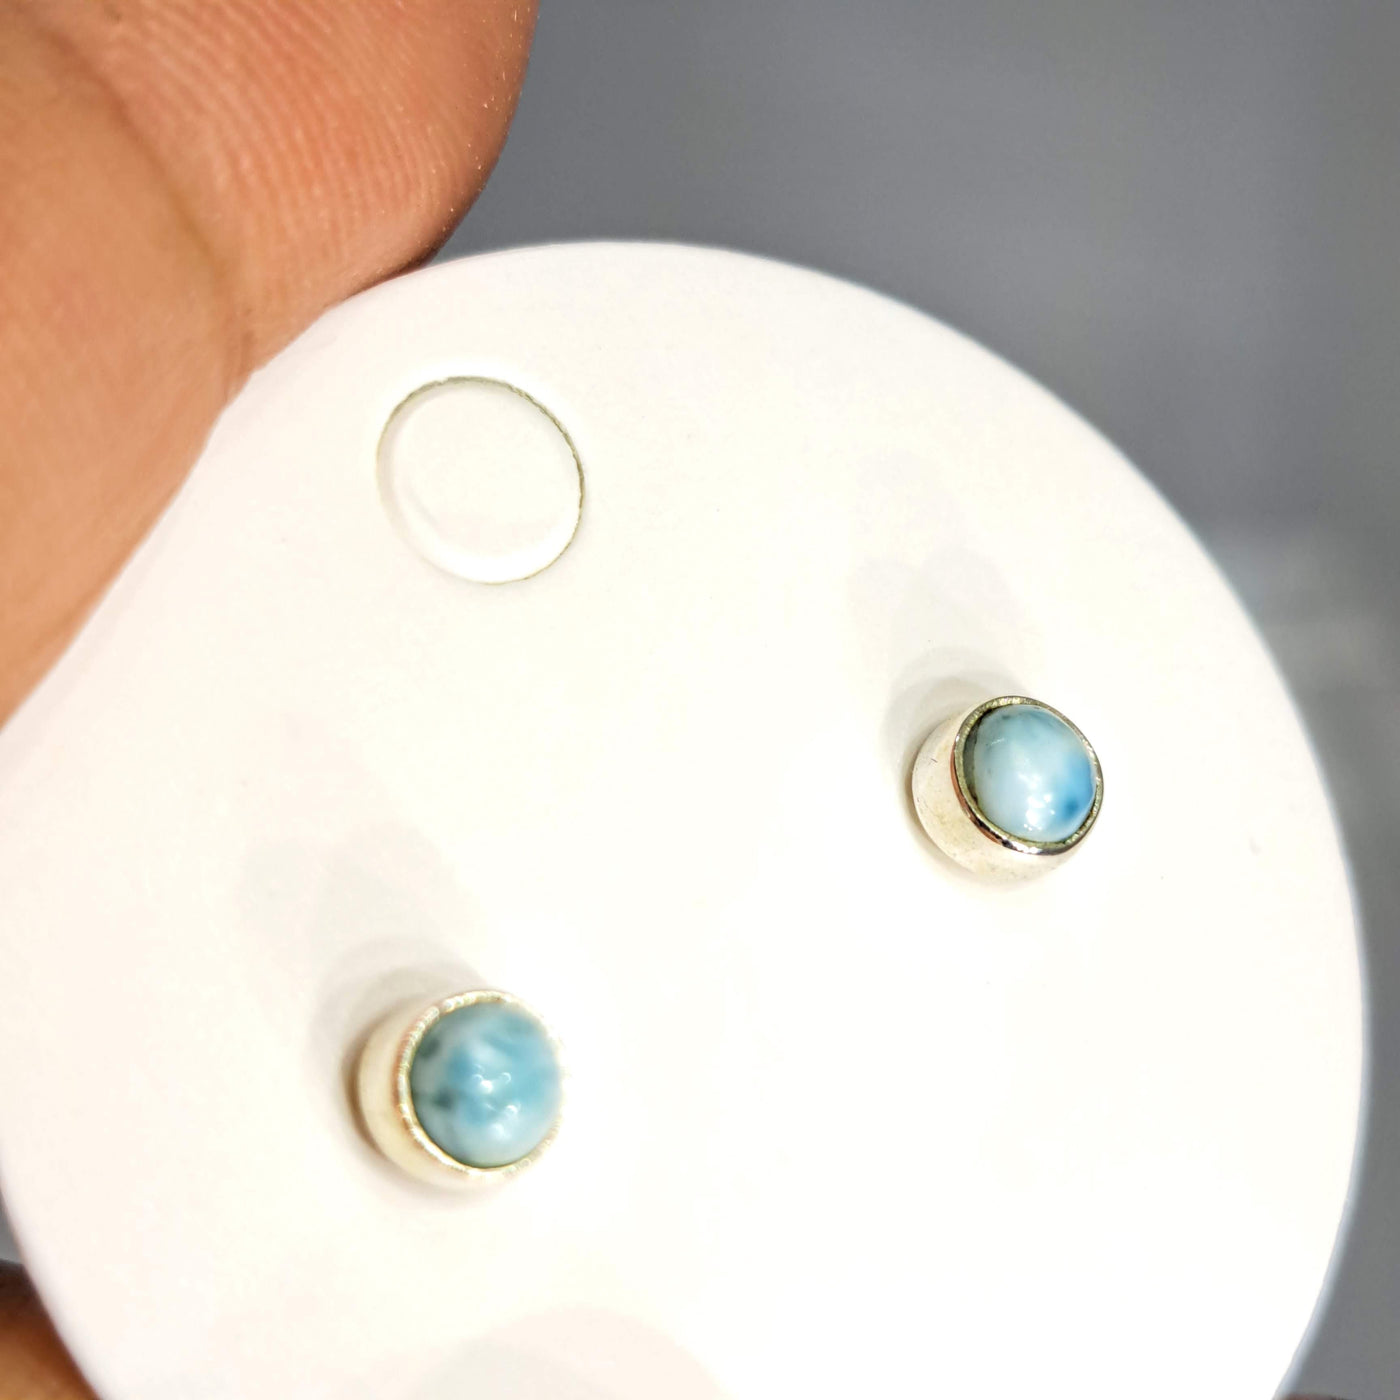 "Ocean" Tiny (Appx. 3mm) Stud Earrings - Larimar, Round or Ovals In Sterling or Gold Sterling